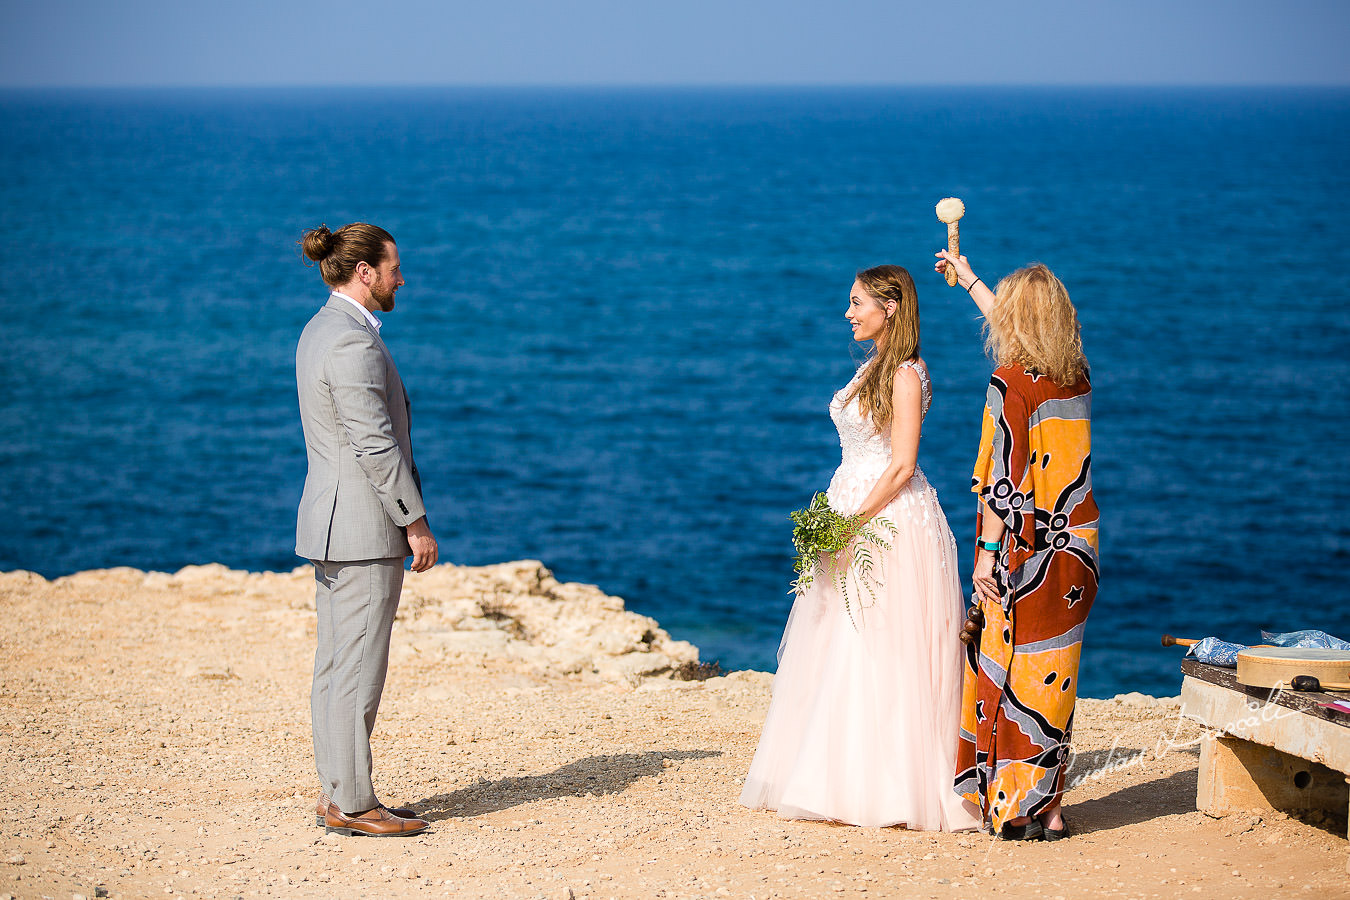 The shaman blessing the bride, moments captured by Cyprus Wedding Photographer Cristian Dascalu.